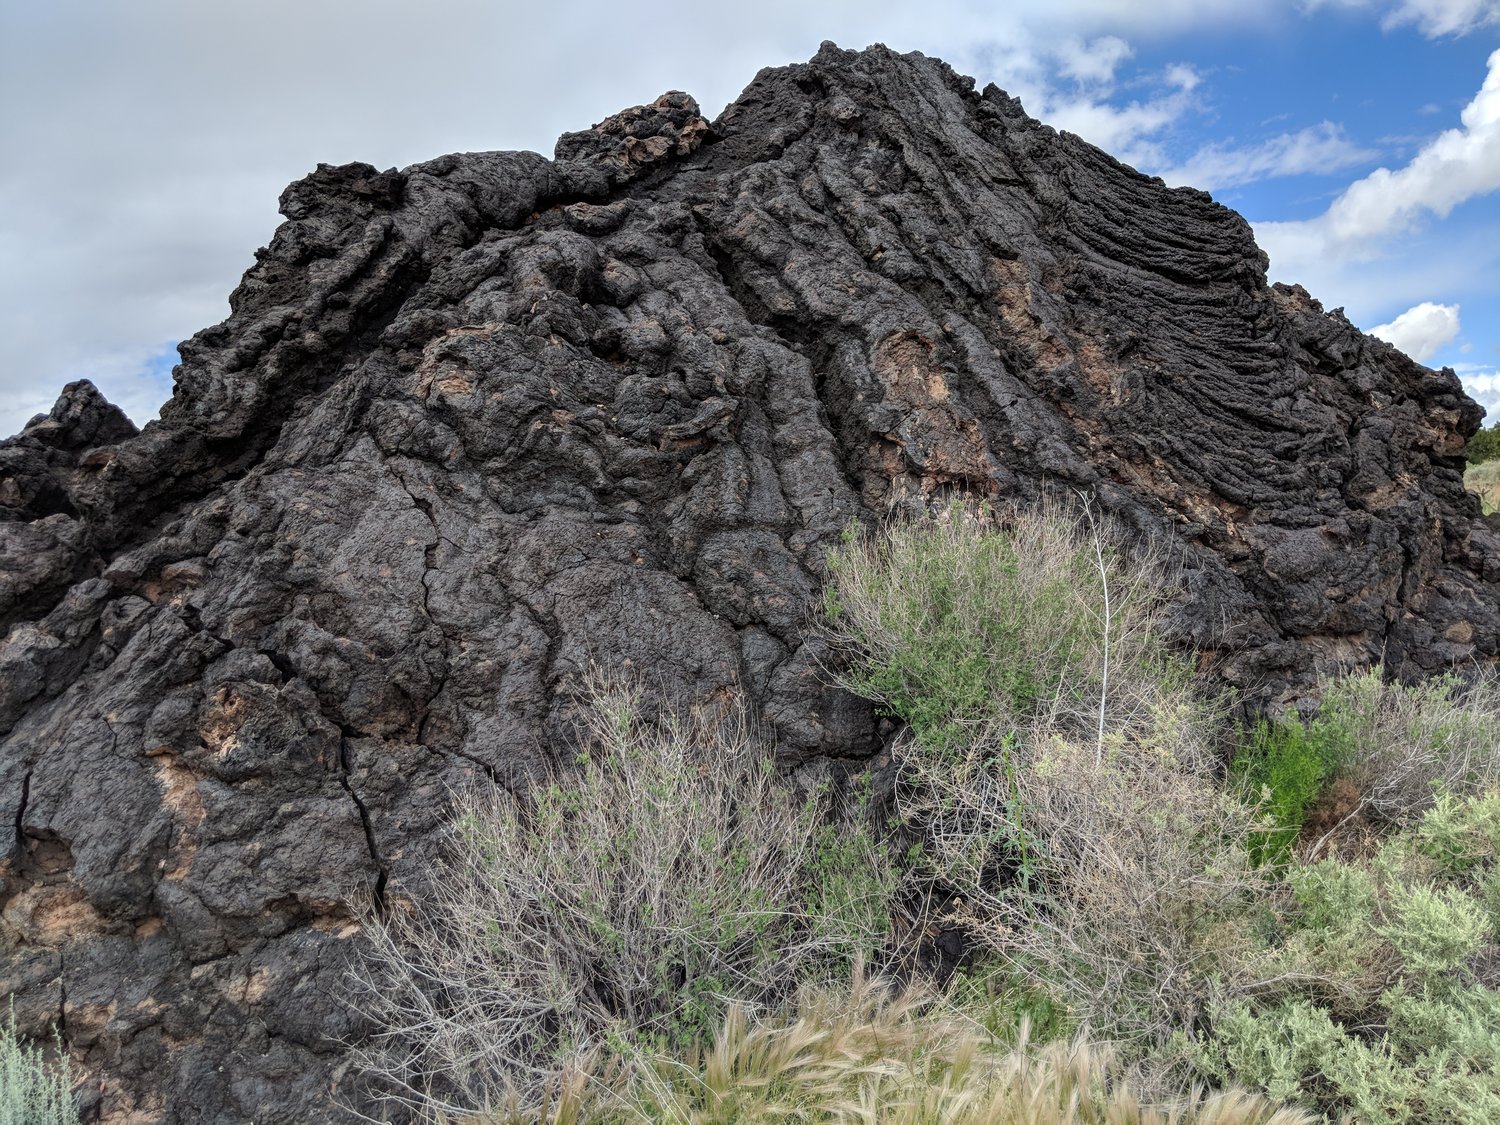 An easy loop nature trail provides dramatic views of the lava flow at Valley of the Fires.